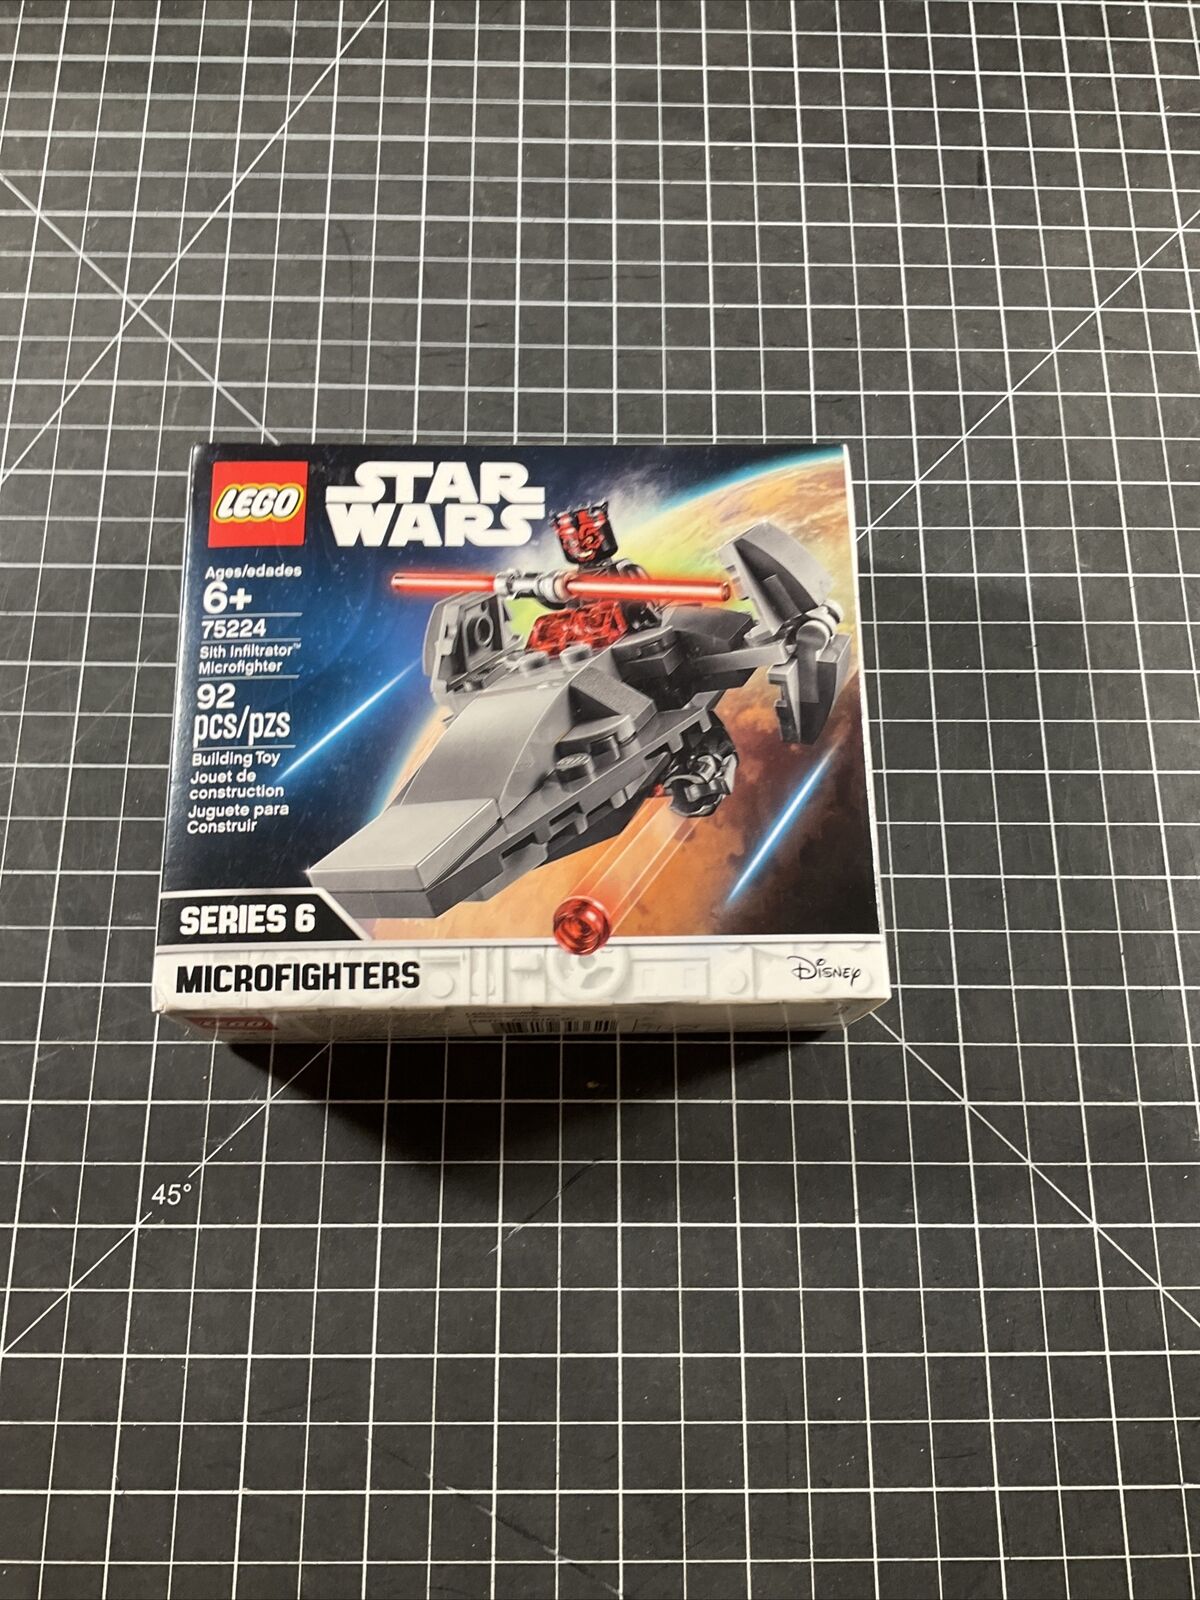 LEGO Star Wars: Sith Infiltrator Microfighter (75224)